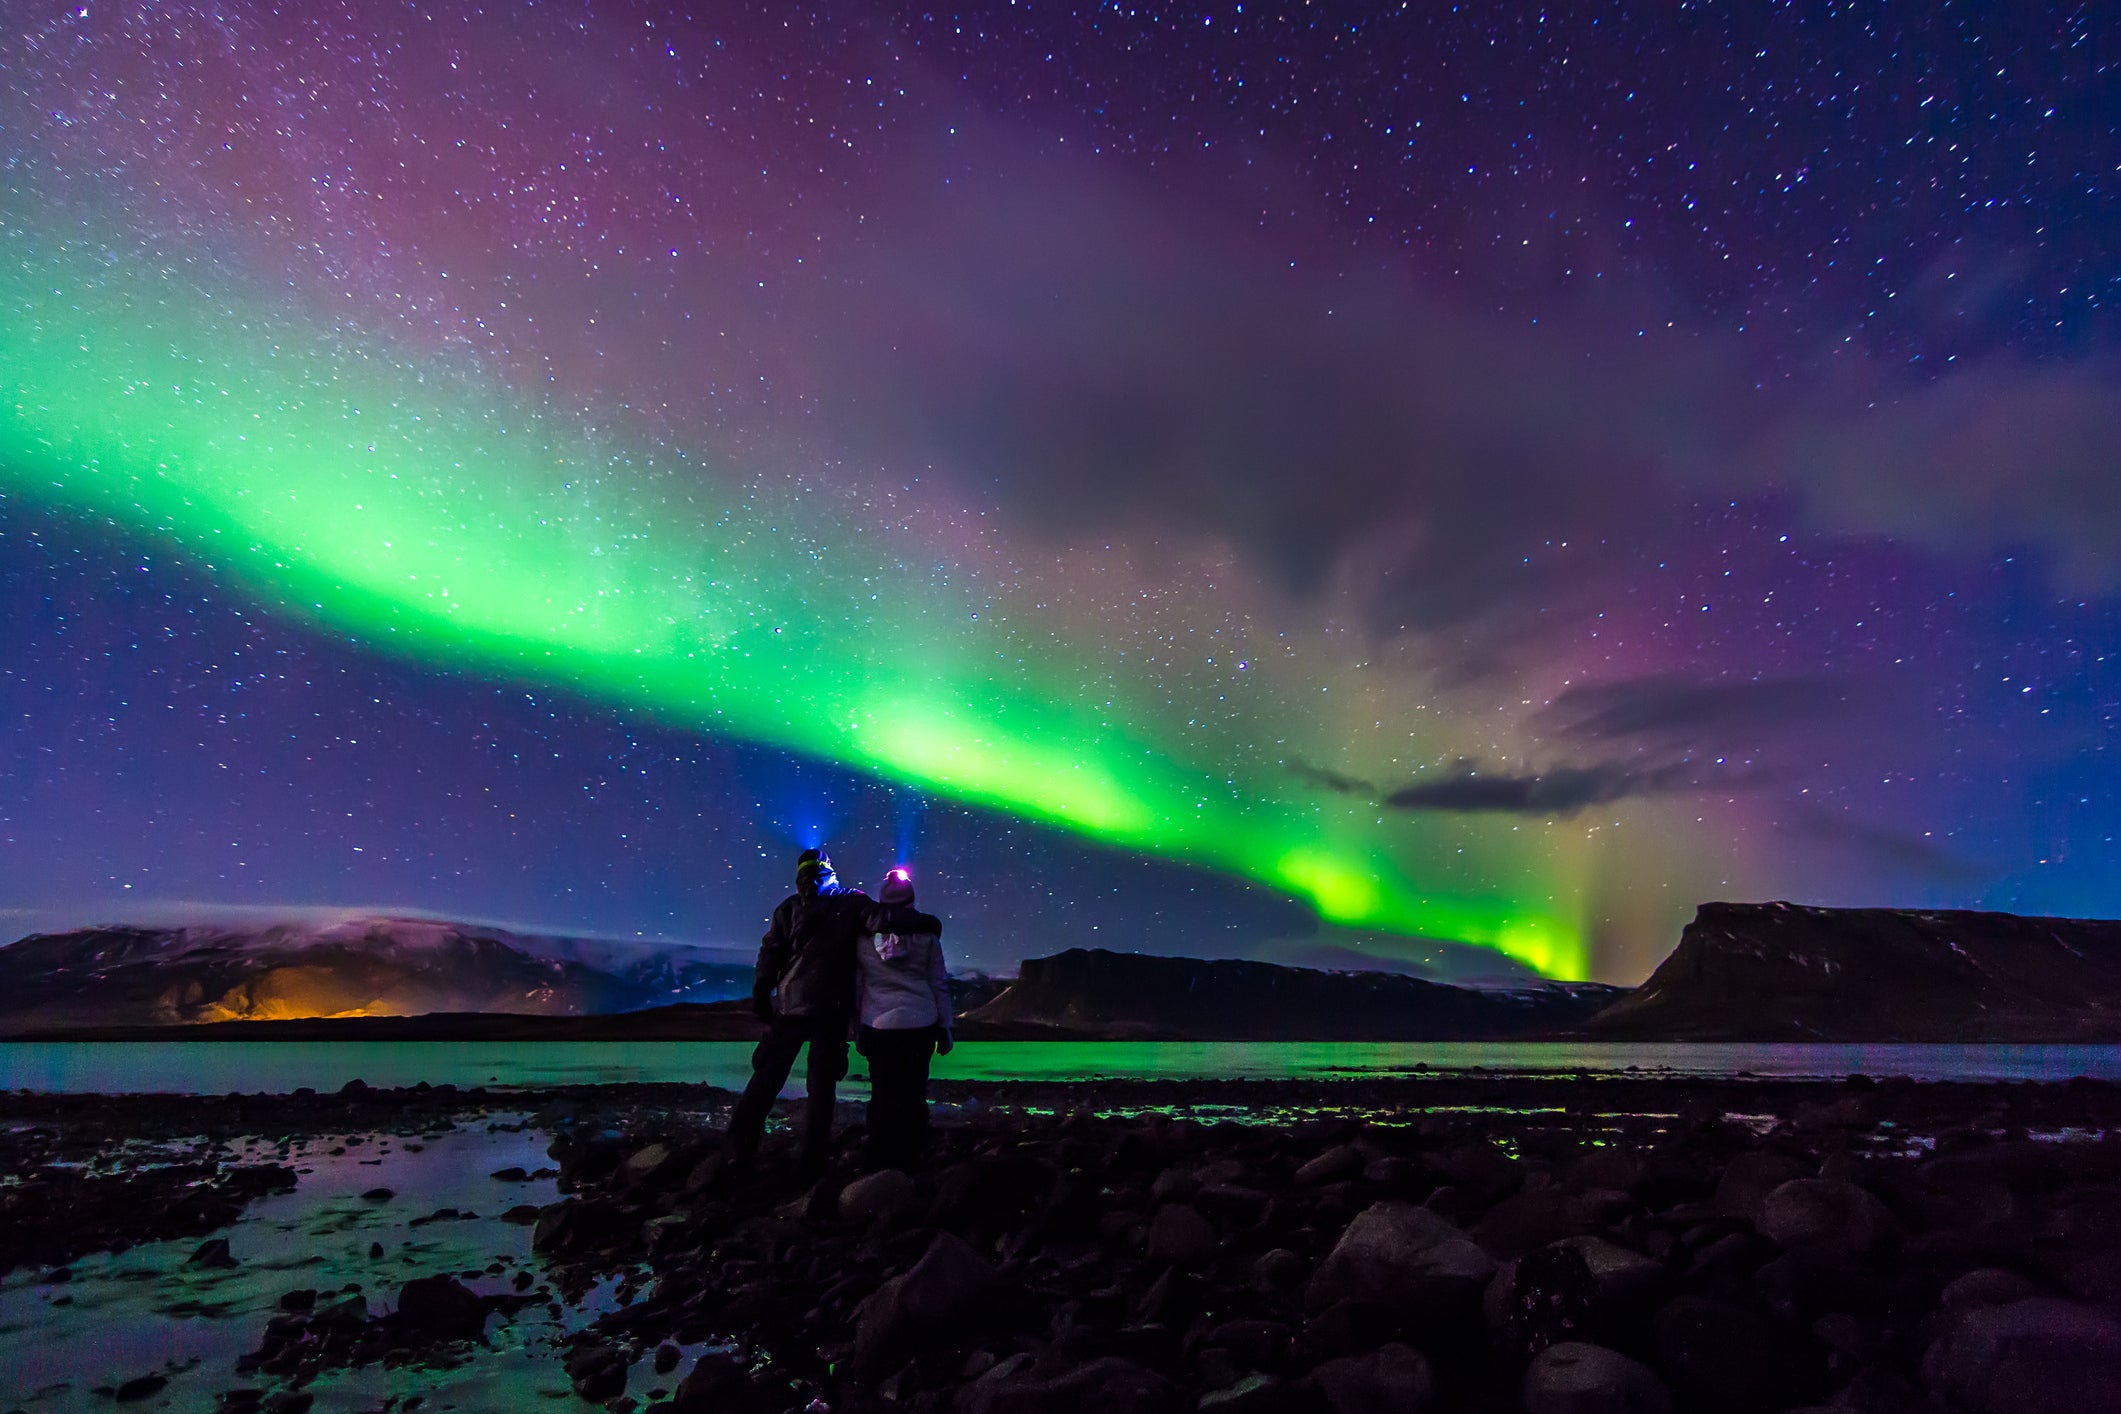 Remote locations in Iceland provide clear conditions for views of the Northern Lights